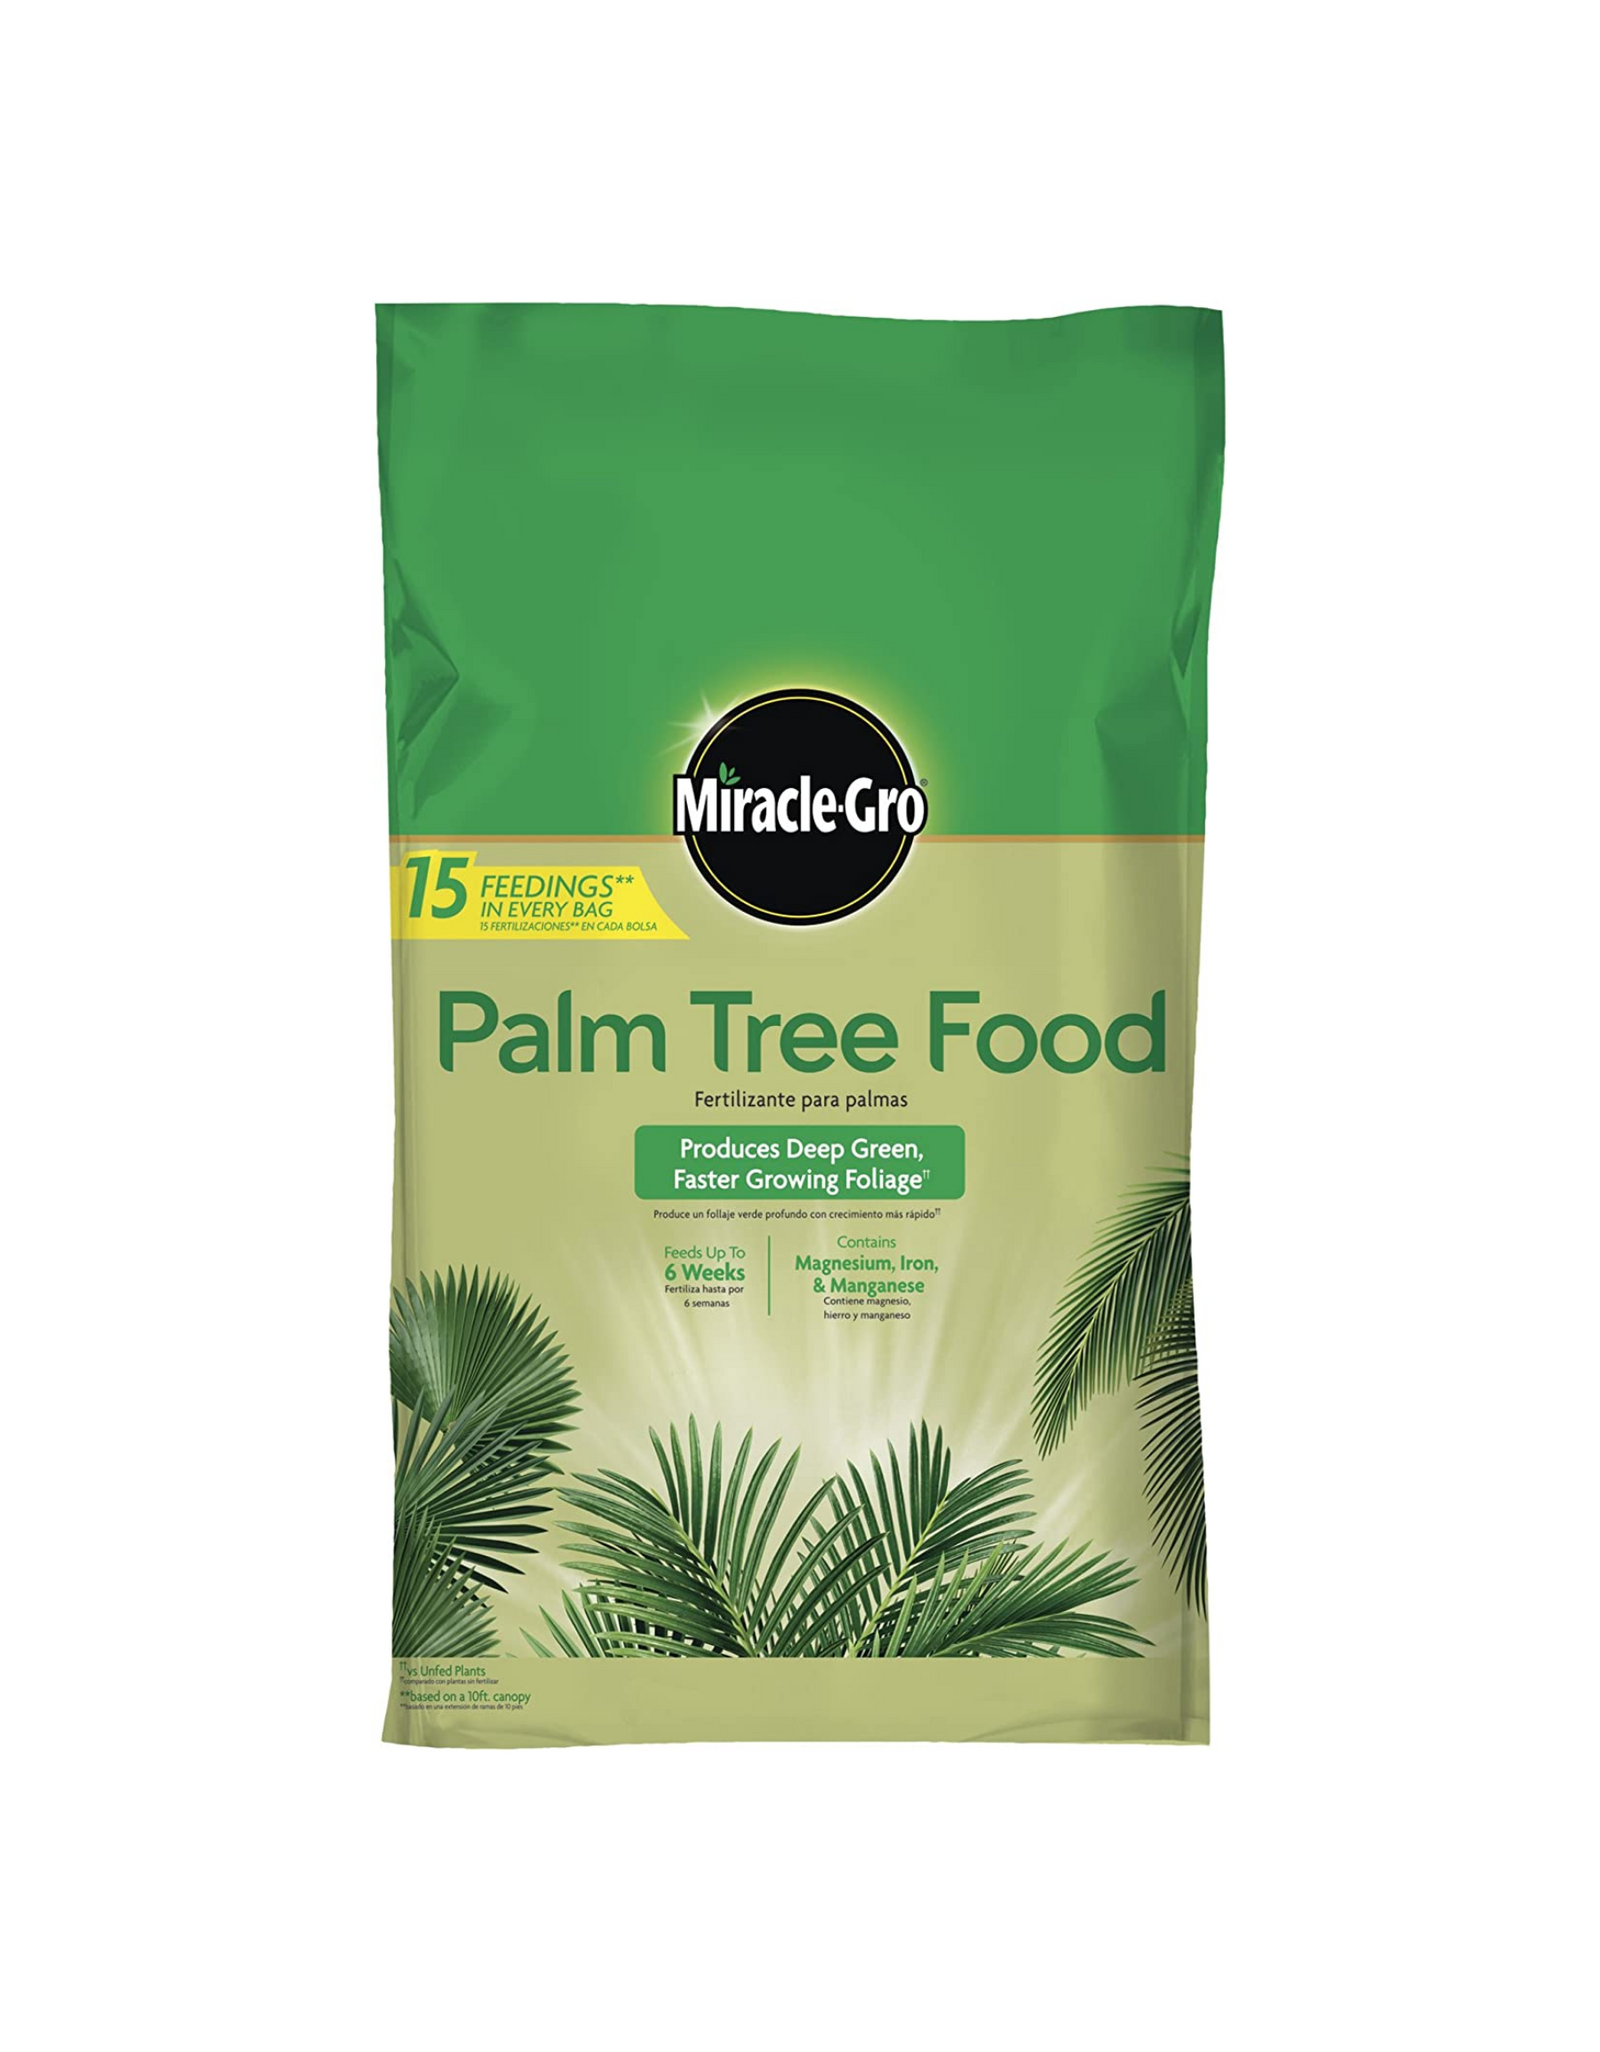 Miracle-Gro Palm Tree Food, 20 lbs. Produces Deep Green